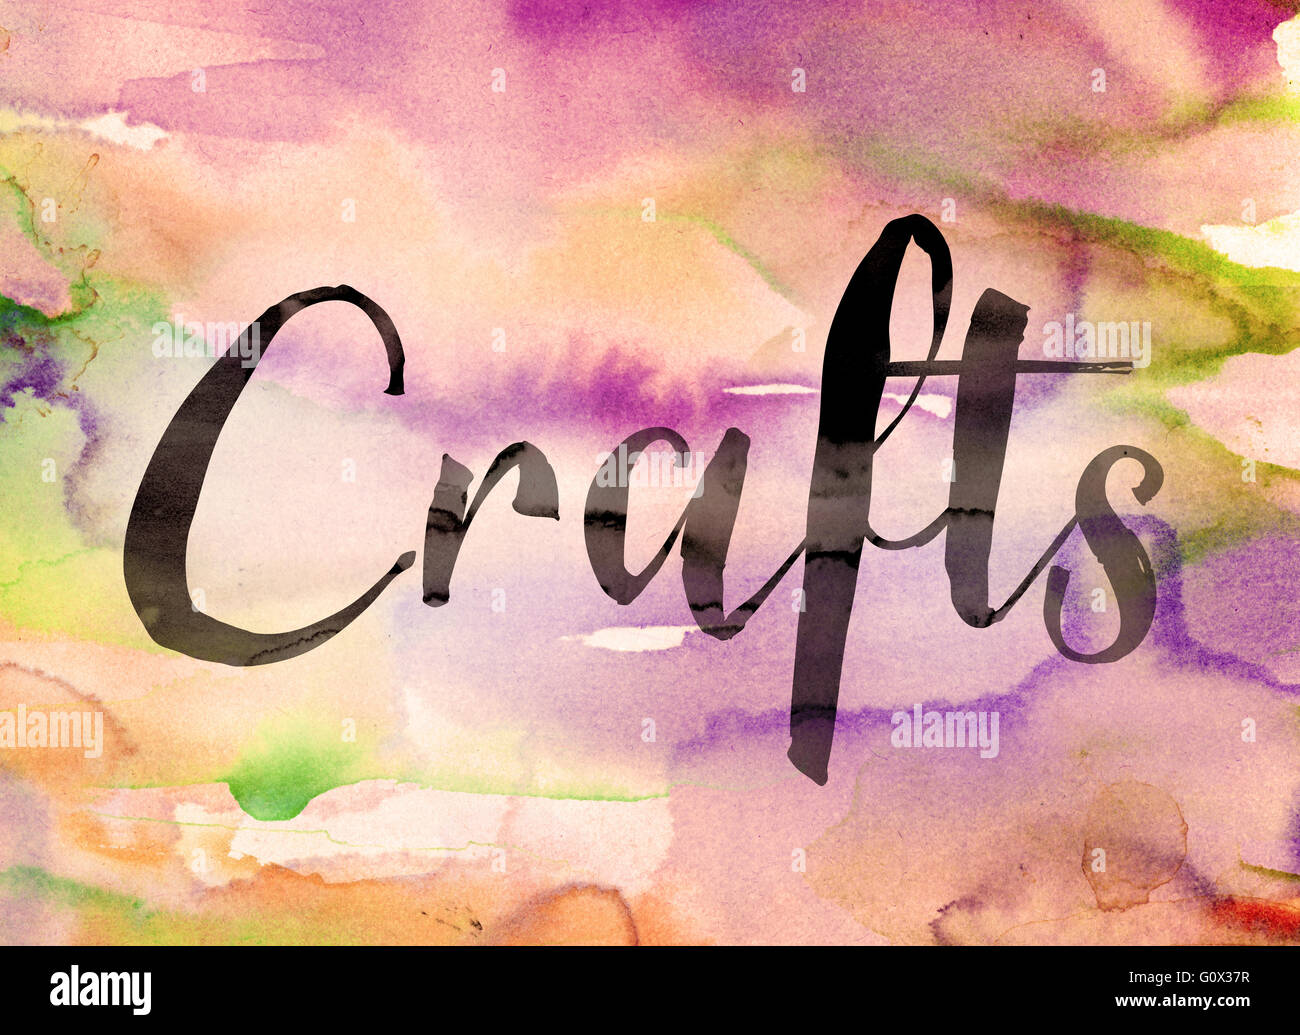 The word "Crafts" written in black paint on a colorful watercolor Stock